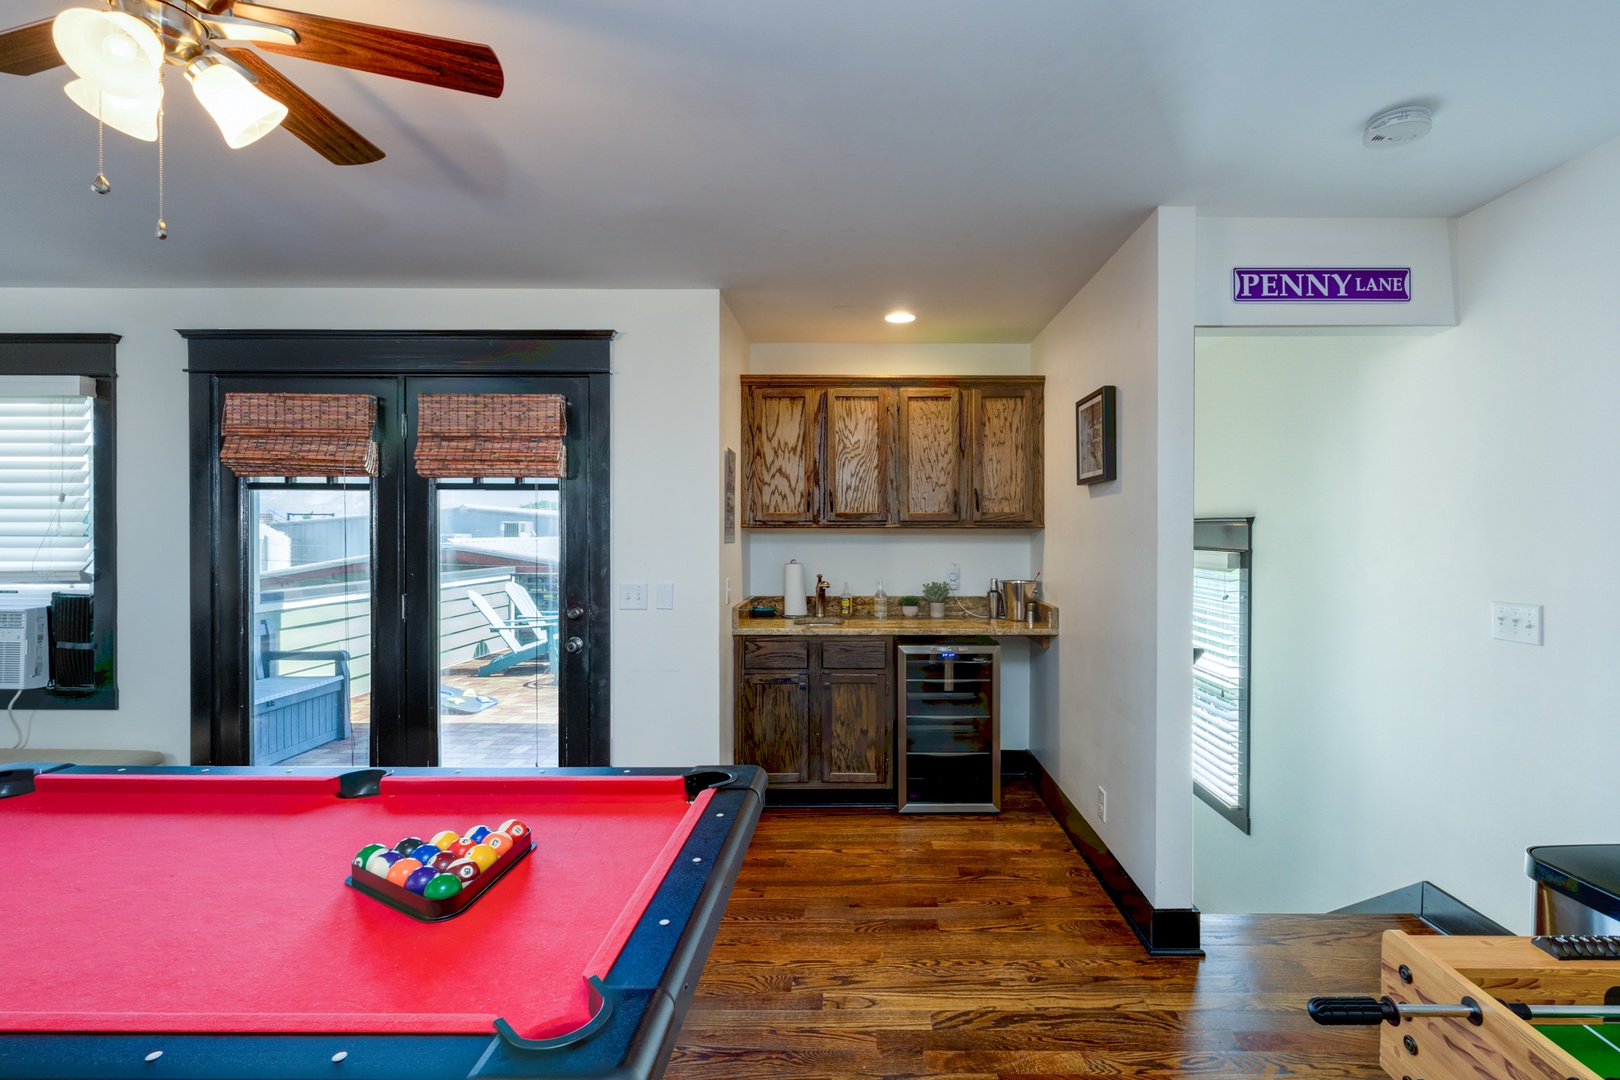 Third Floor Game Room offering Twin Bed & Trundle, Foosball, Pool Table, Smart TV, and Mini Bar Area